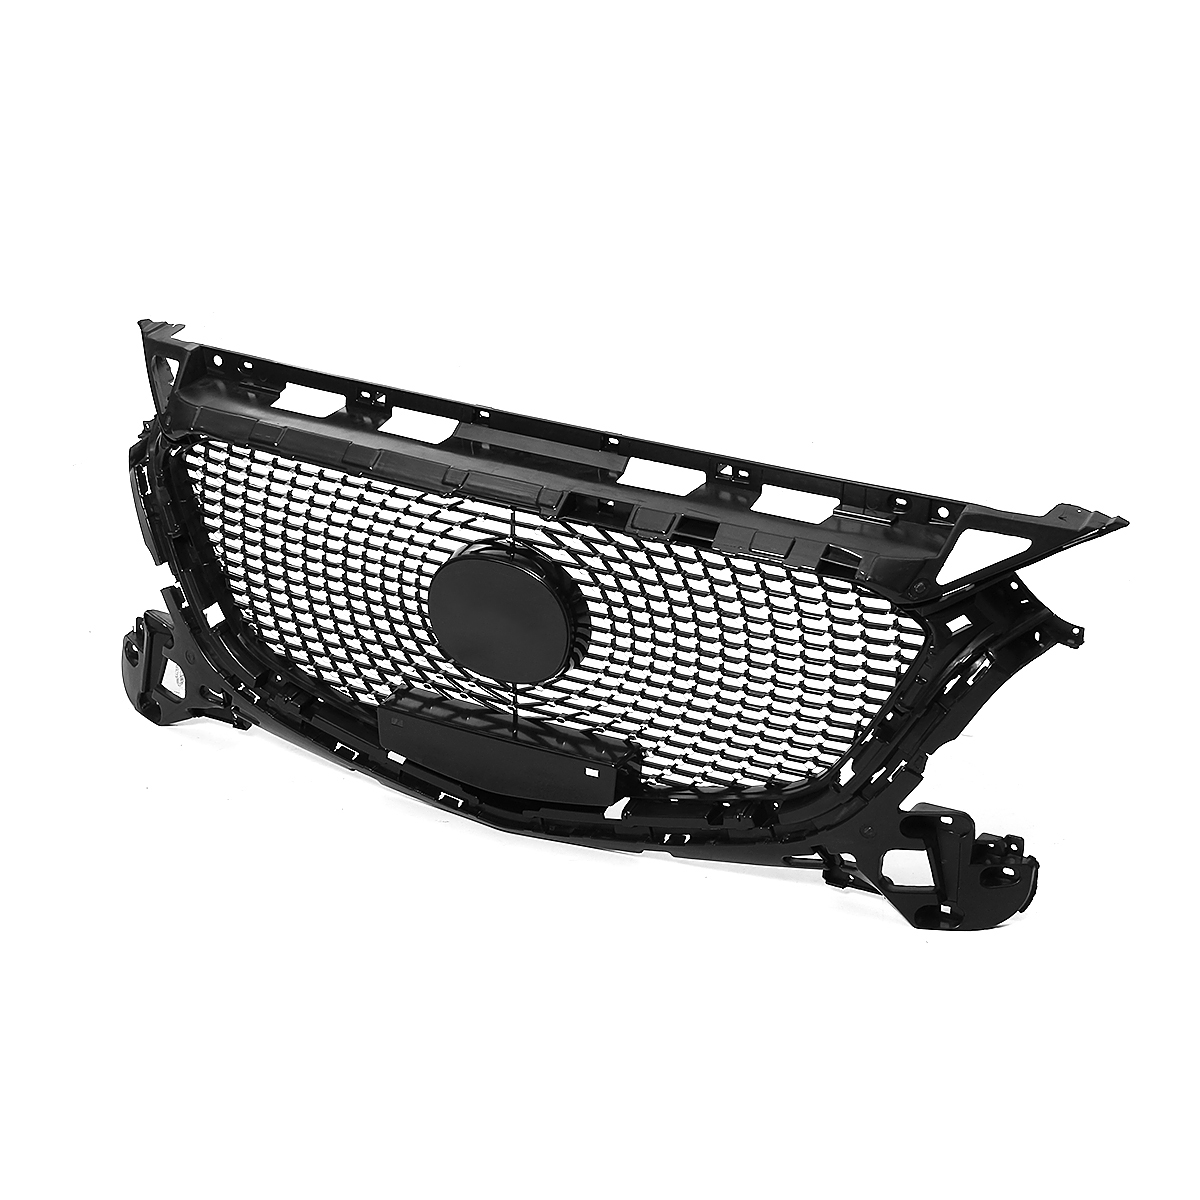 ABS Gypsophila Front Bumper Racing Grille Grill for MAZDA 3 AXELA 2017 2018